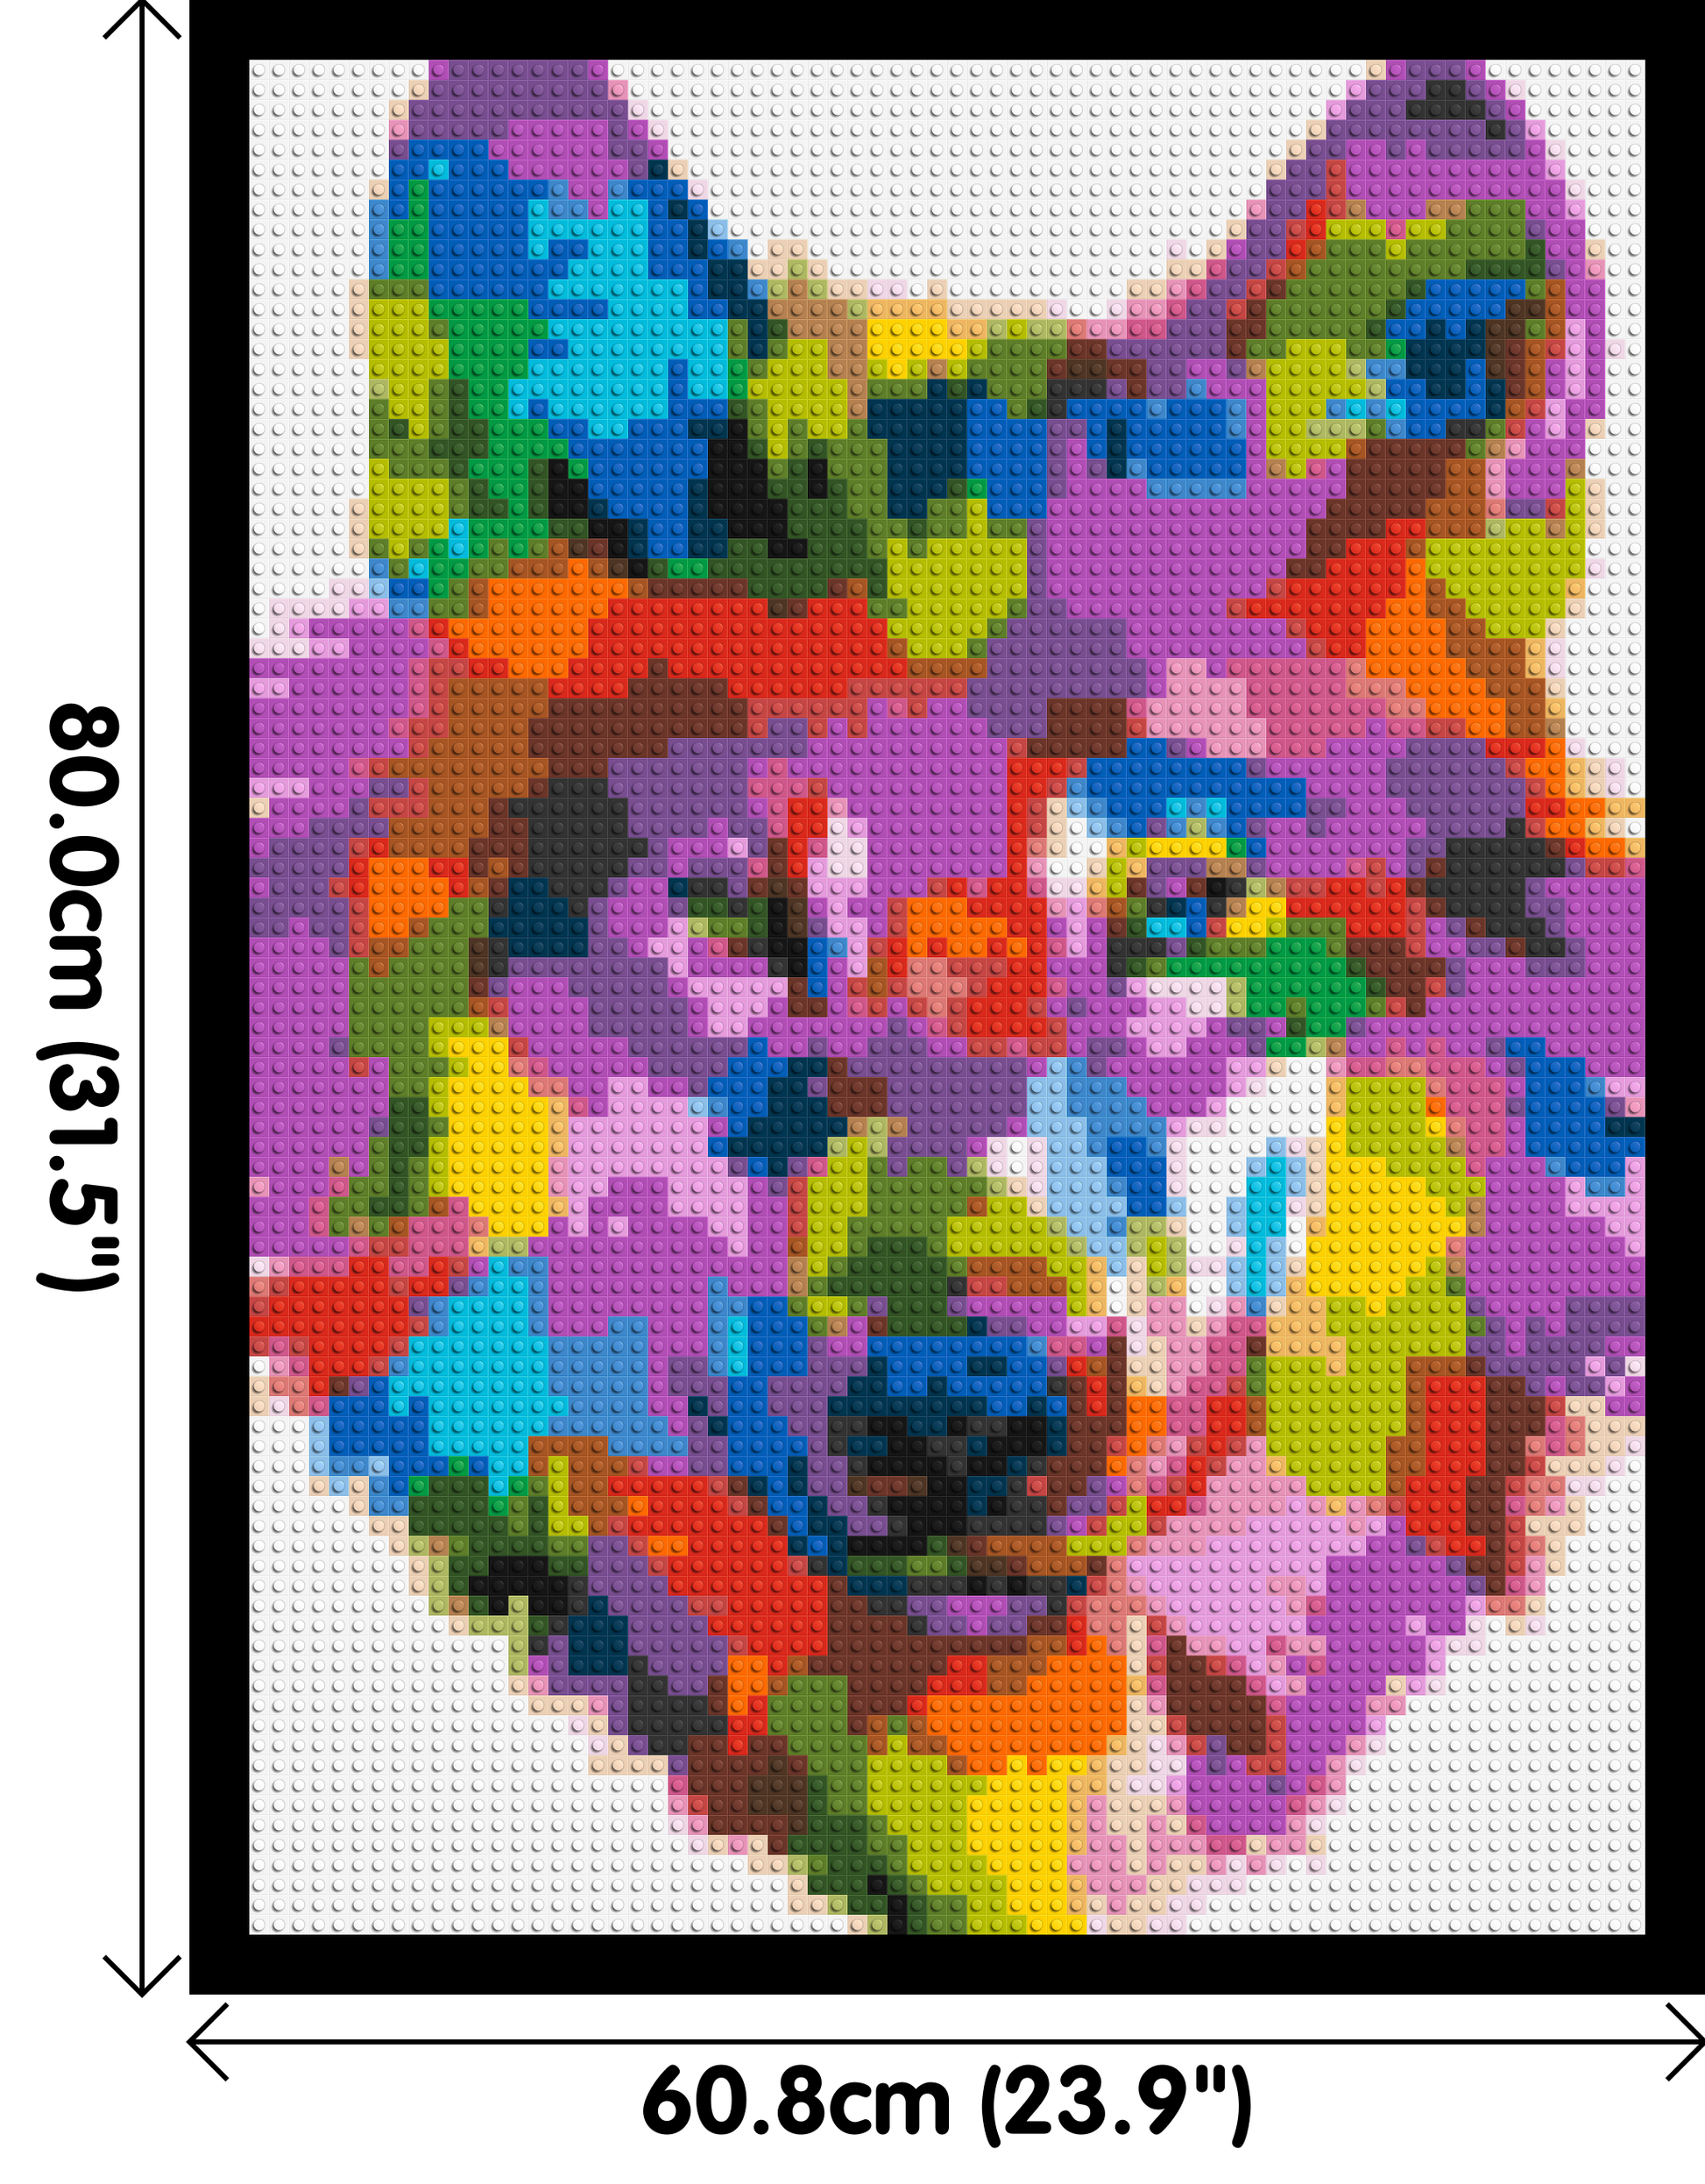 Wolf Colourful Pop Art - Brick Art Mosaic Kit 3x4 dimensions with frame